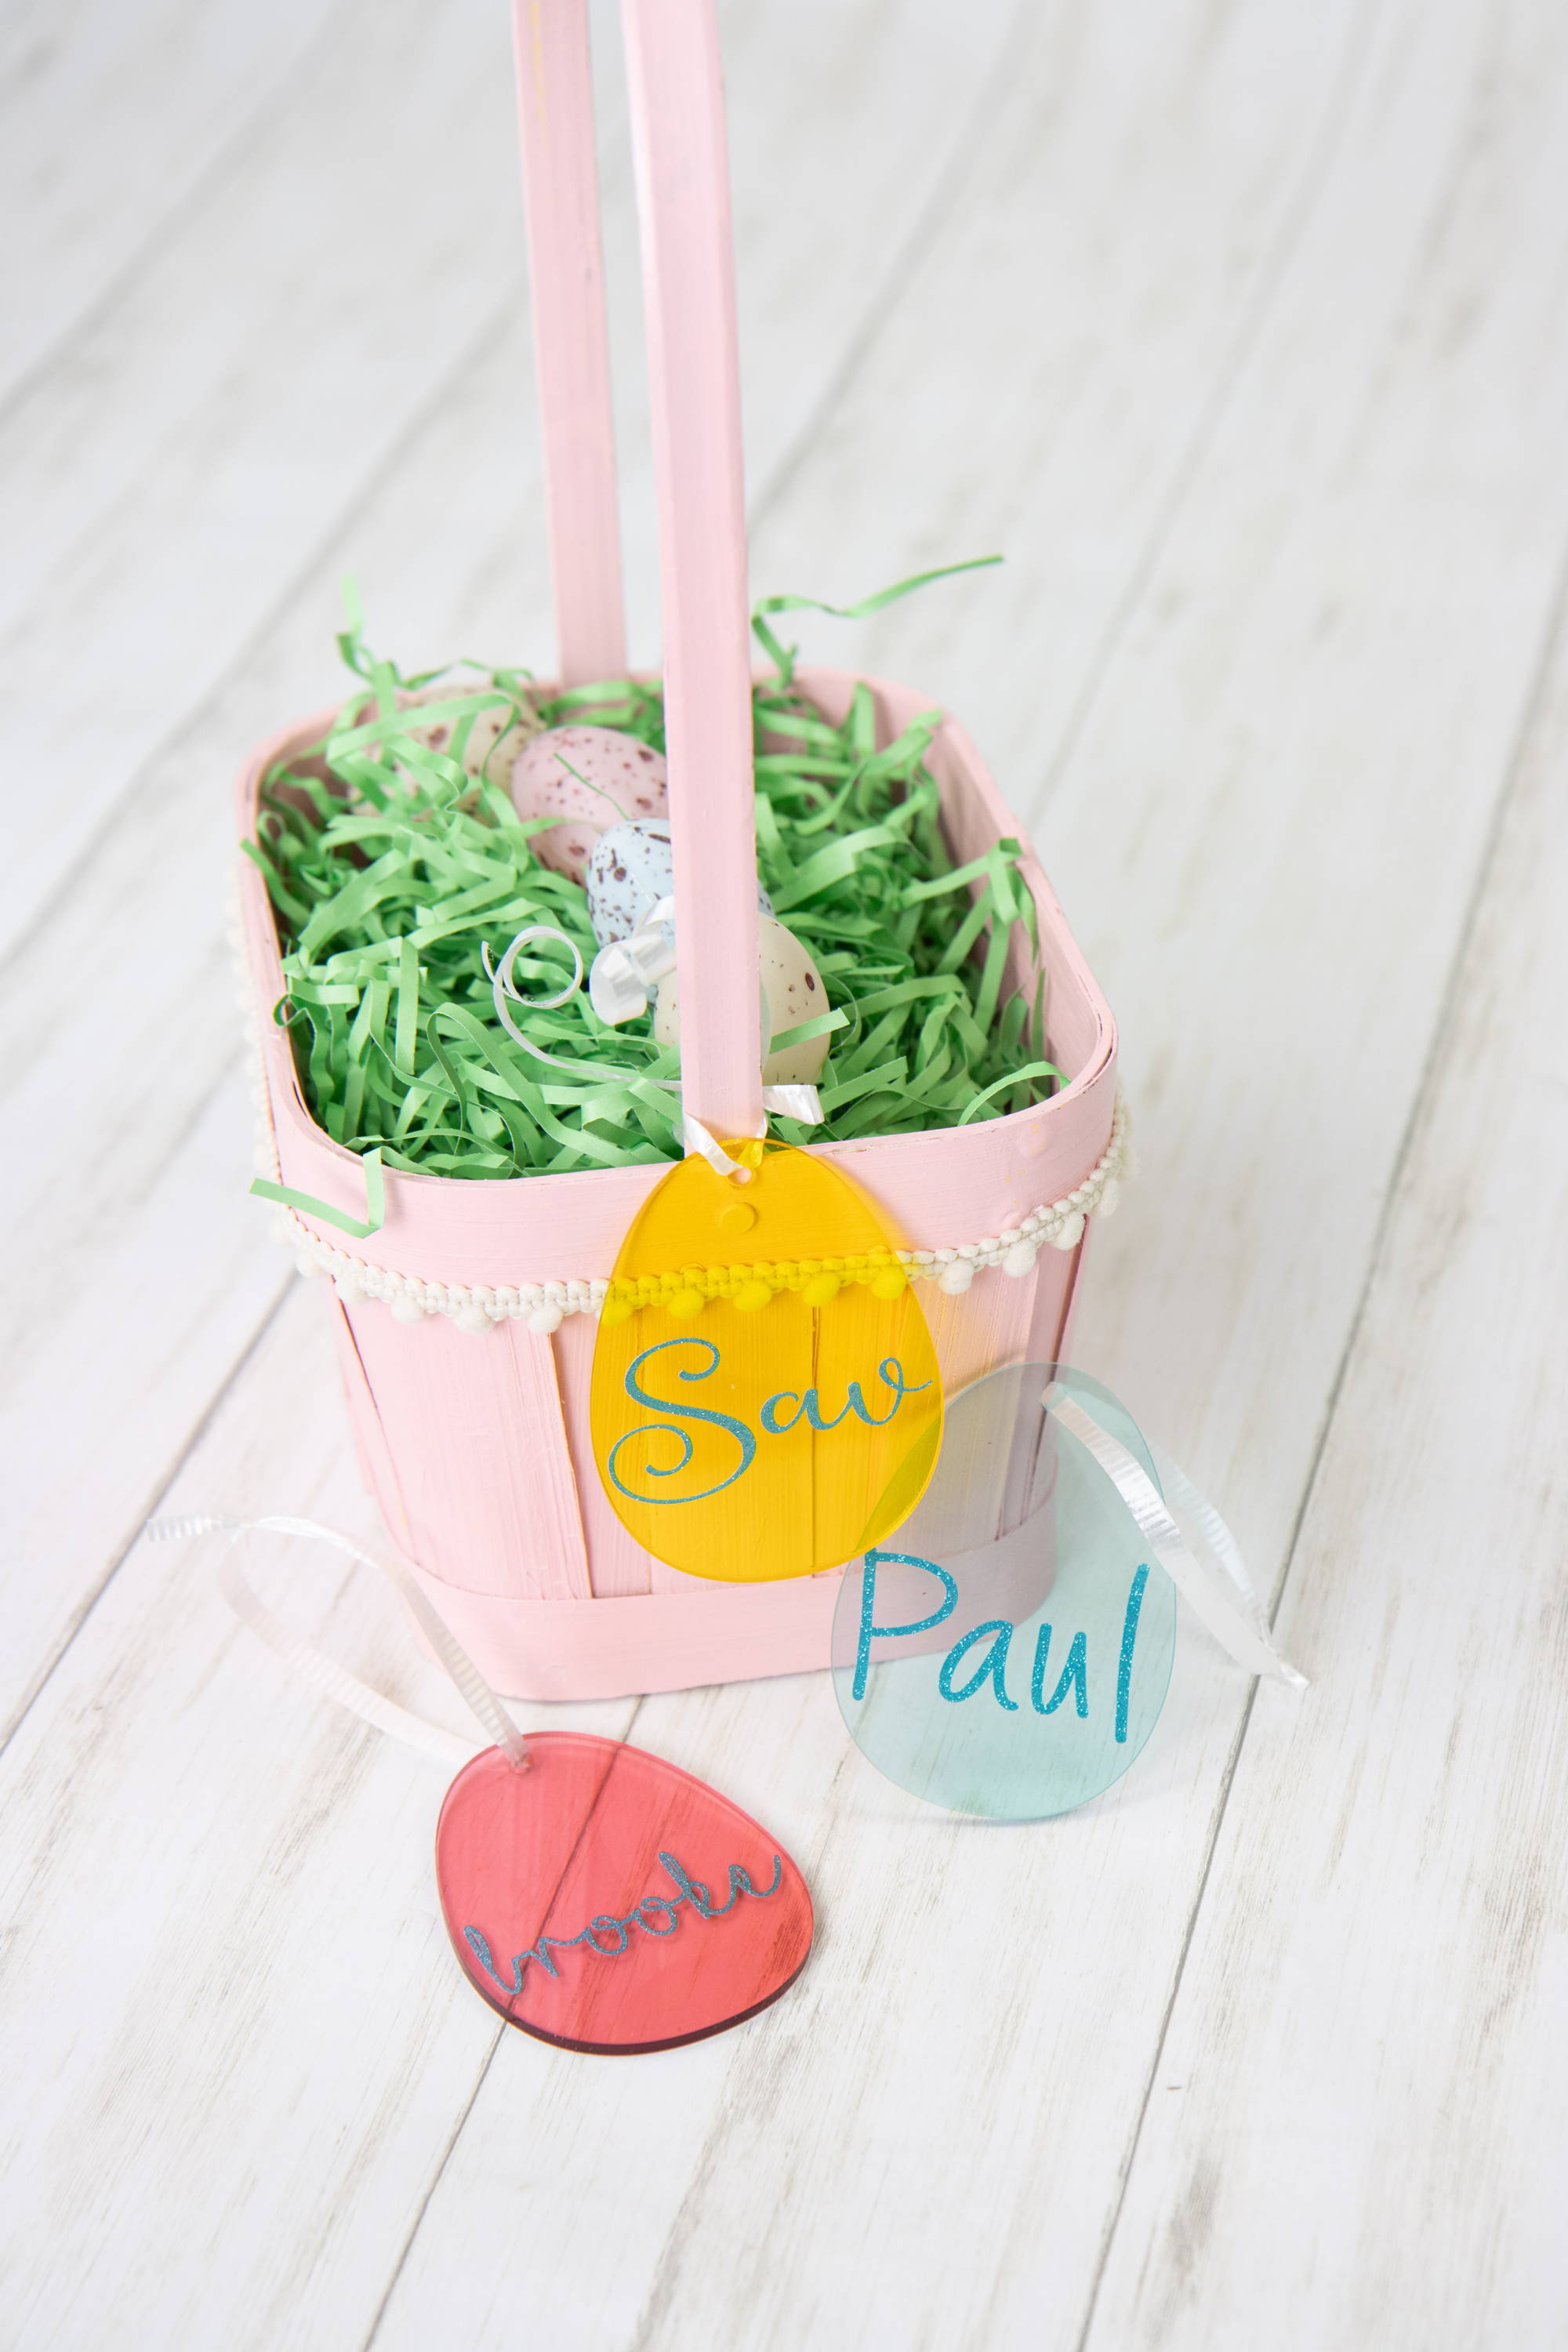 Easter basket with Tags attached. The tags are acrylic Easter eggs that have people's names on them in glitter vinyl 